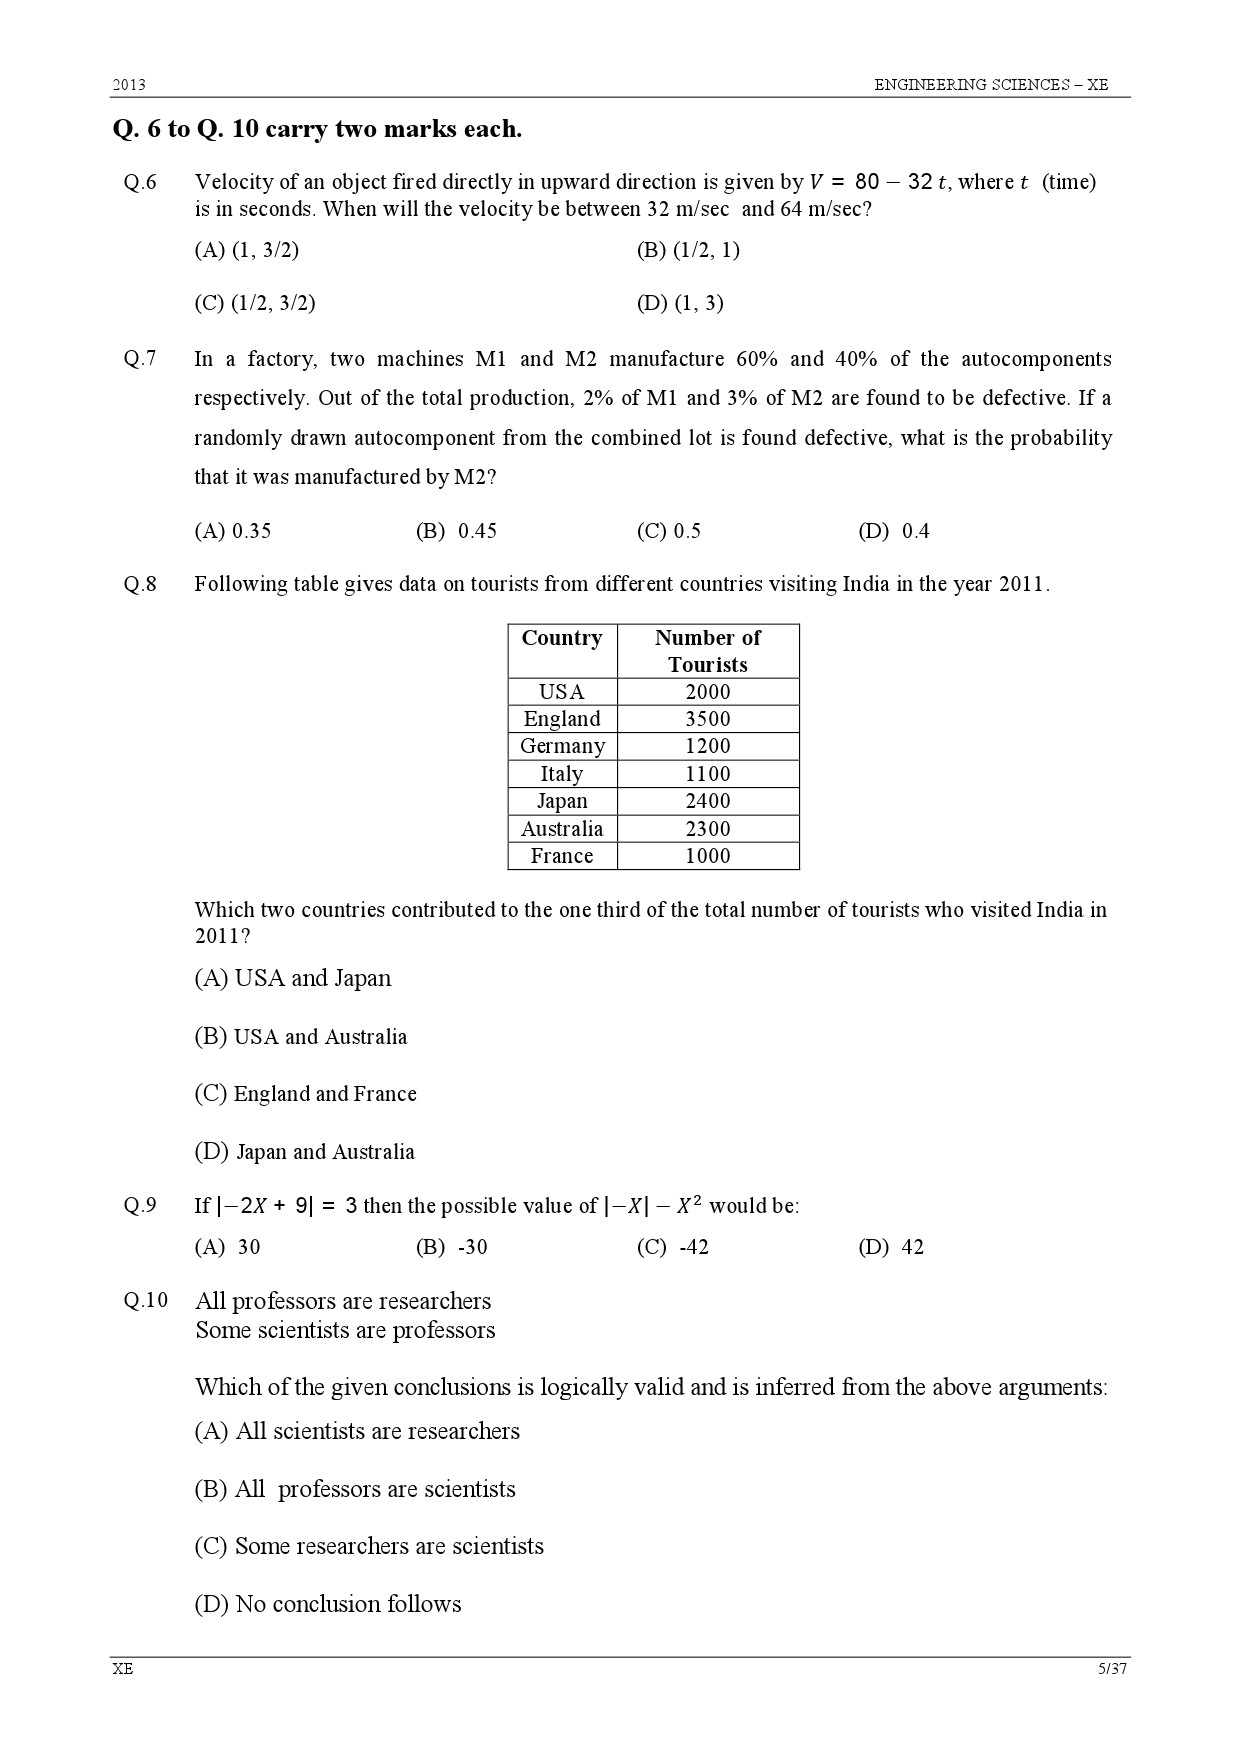 GATE Exam Question Paper 2013 Engineering Sciences 5